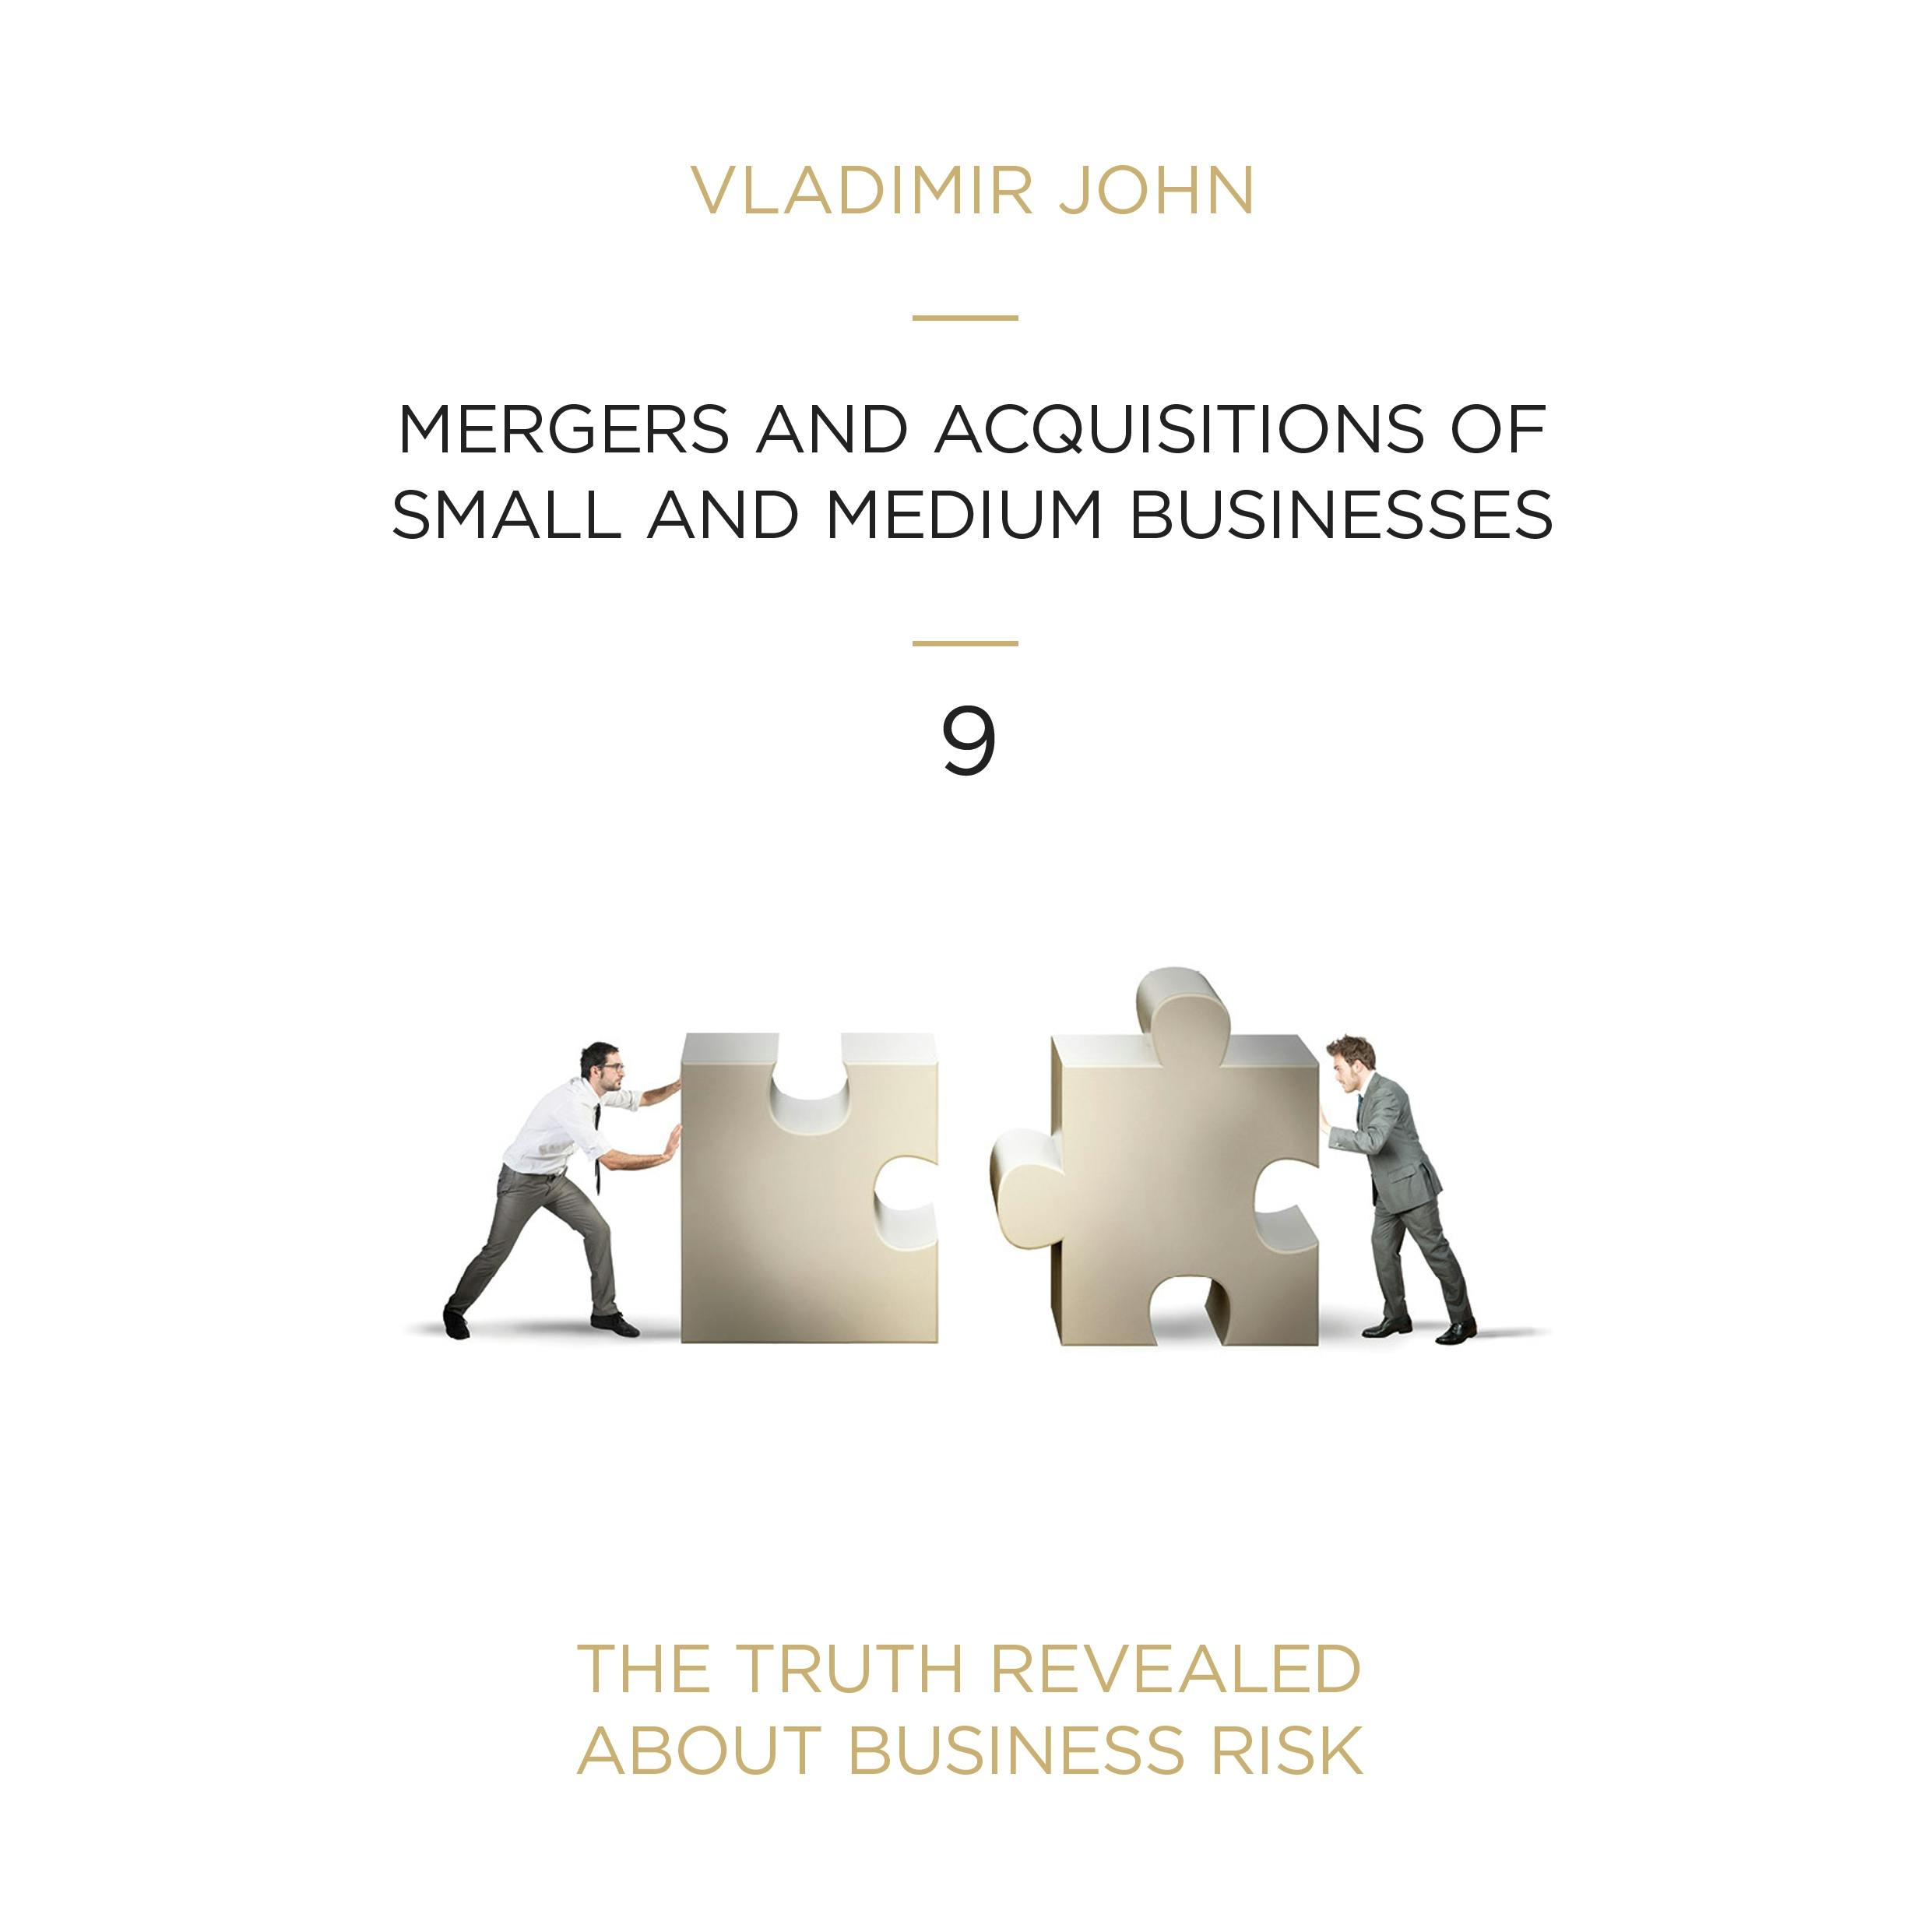 Mergers and Acqusitions of Small and Medium Businesses - Vladimir John